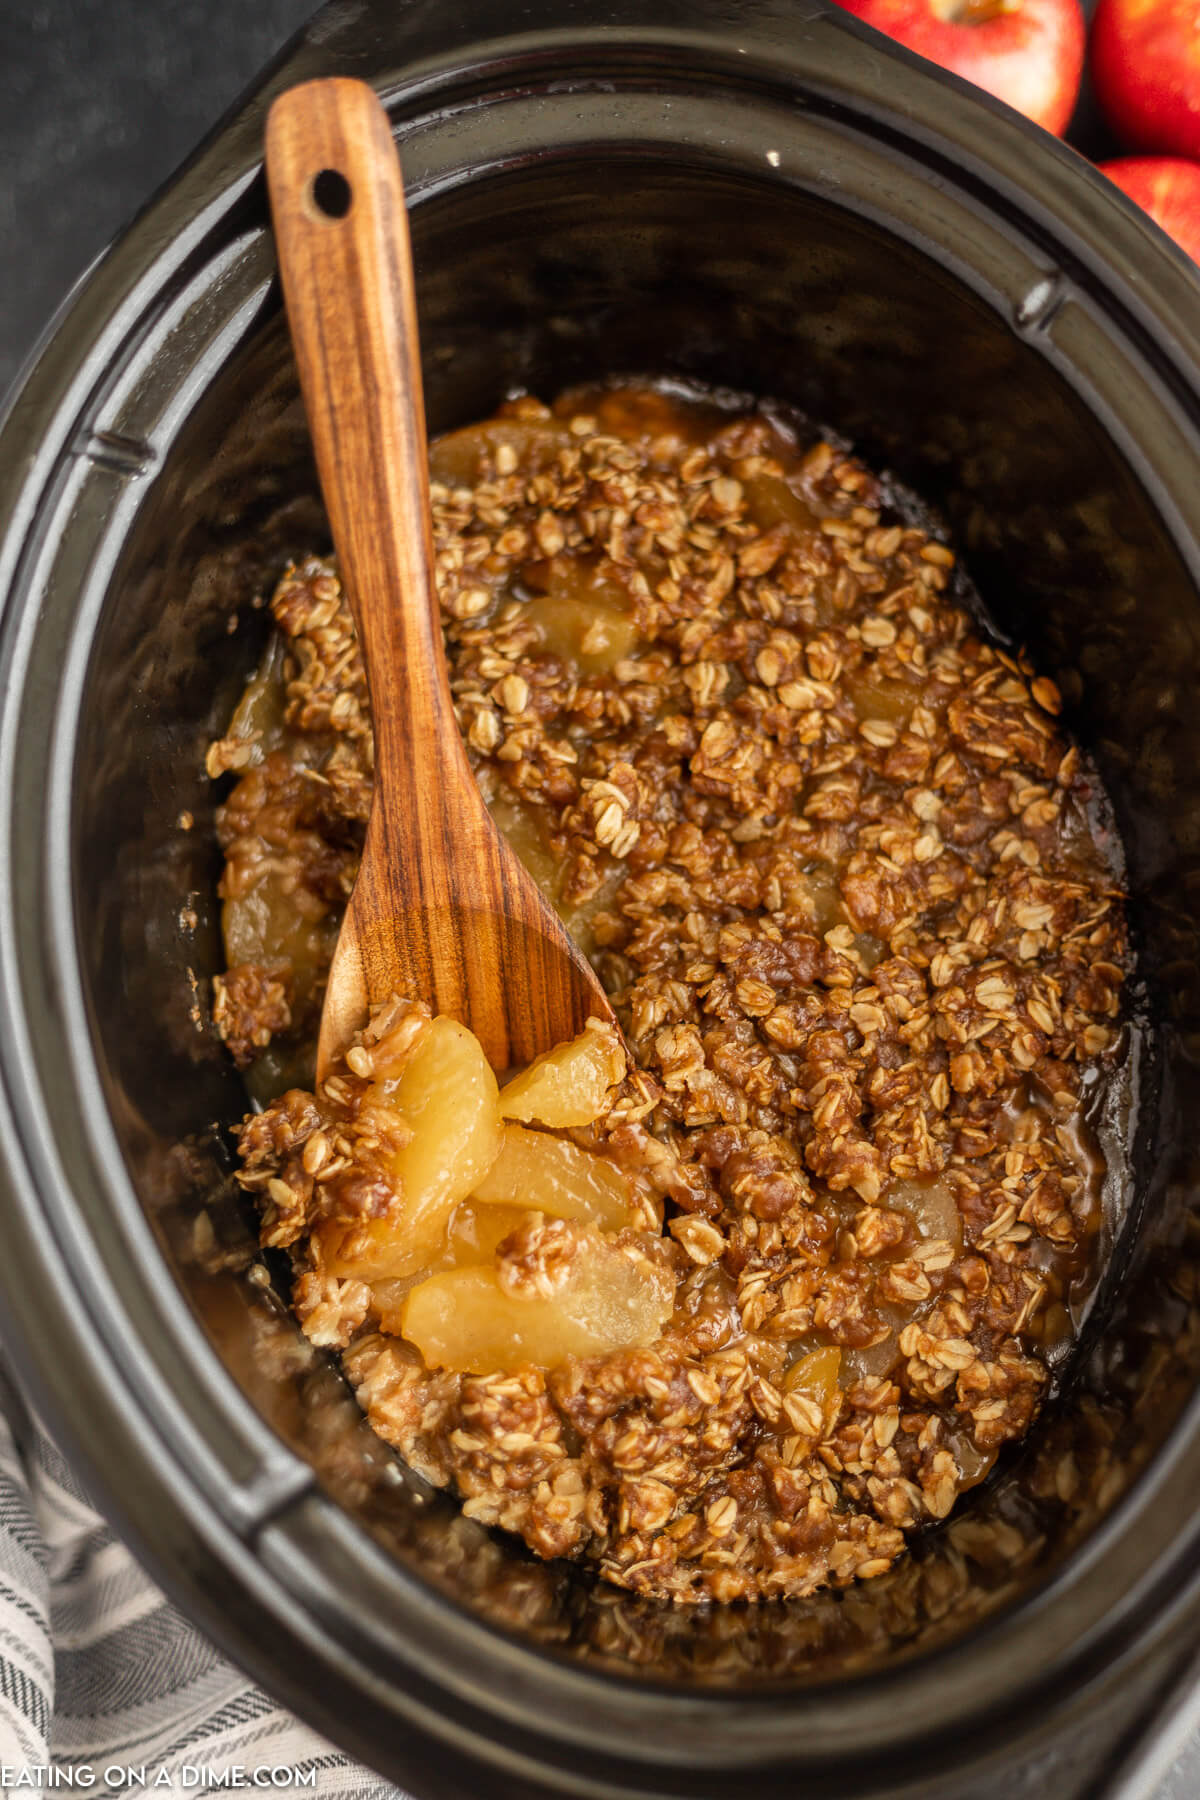 Apple Crisp in the Crock Pot with a wooden spoon